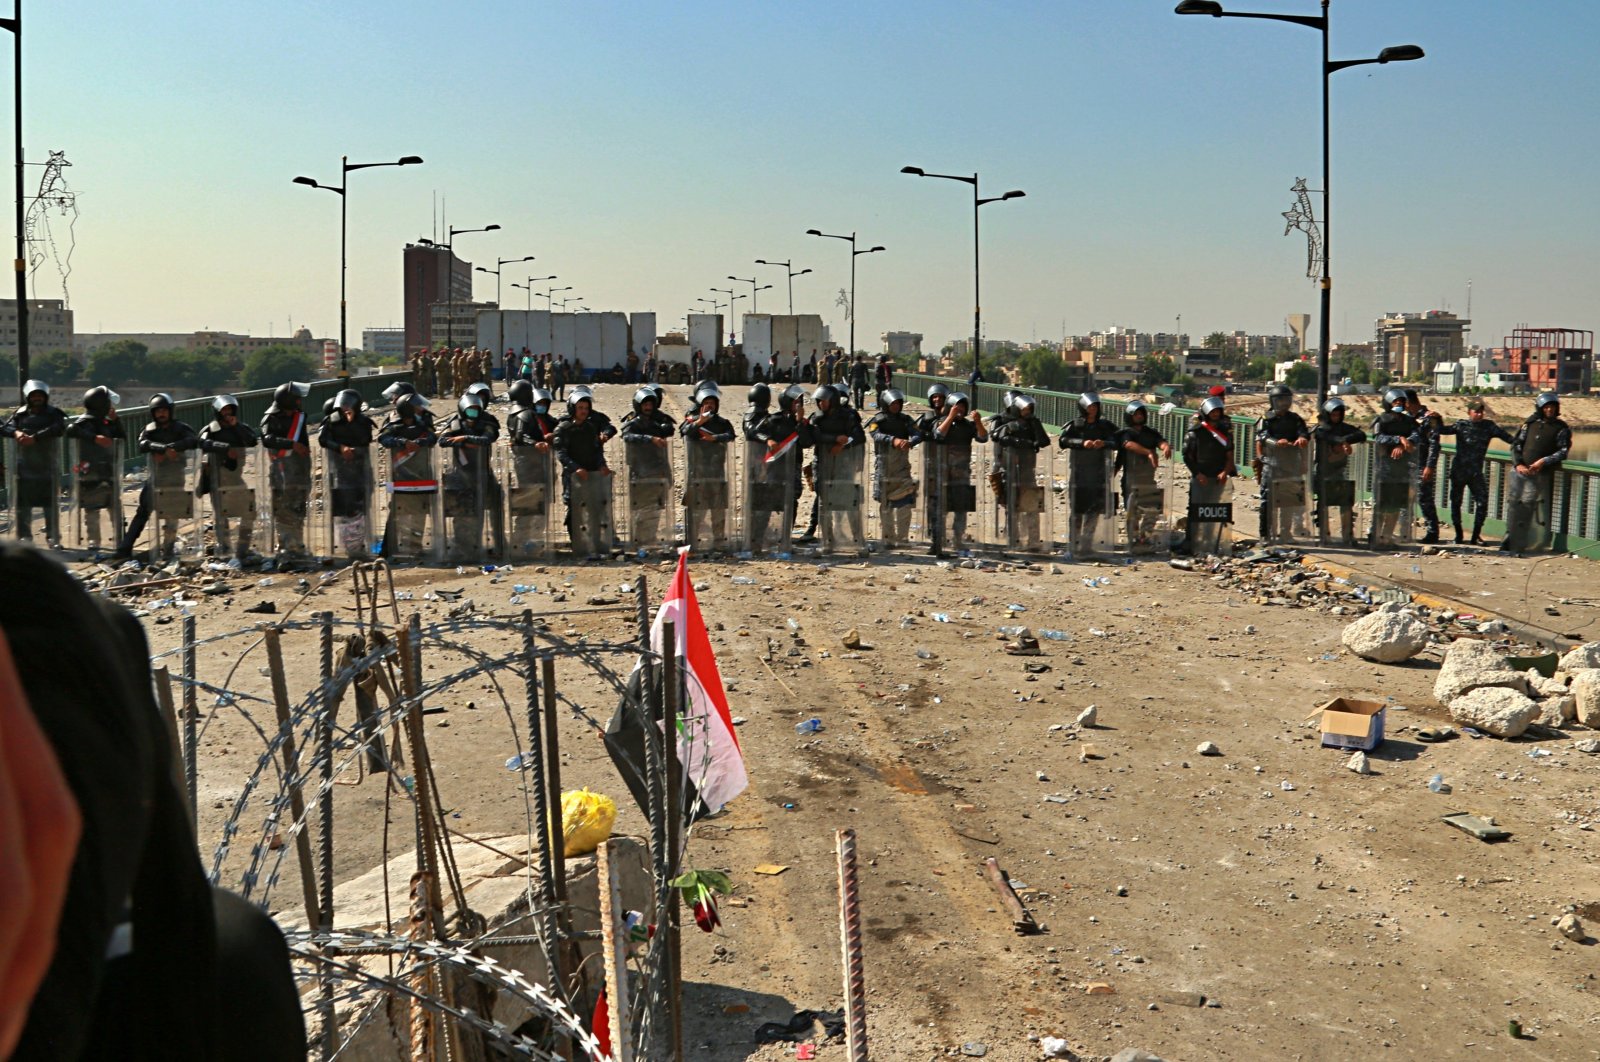 Security forces close the bridge leading to the Green Zone during a demonstration in Baghdad, Iraq, Saturday, Oct. 26, 2019. (AP Photo)